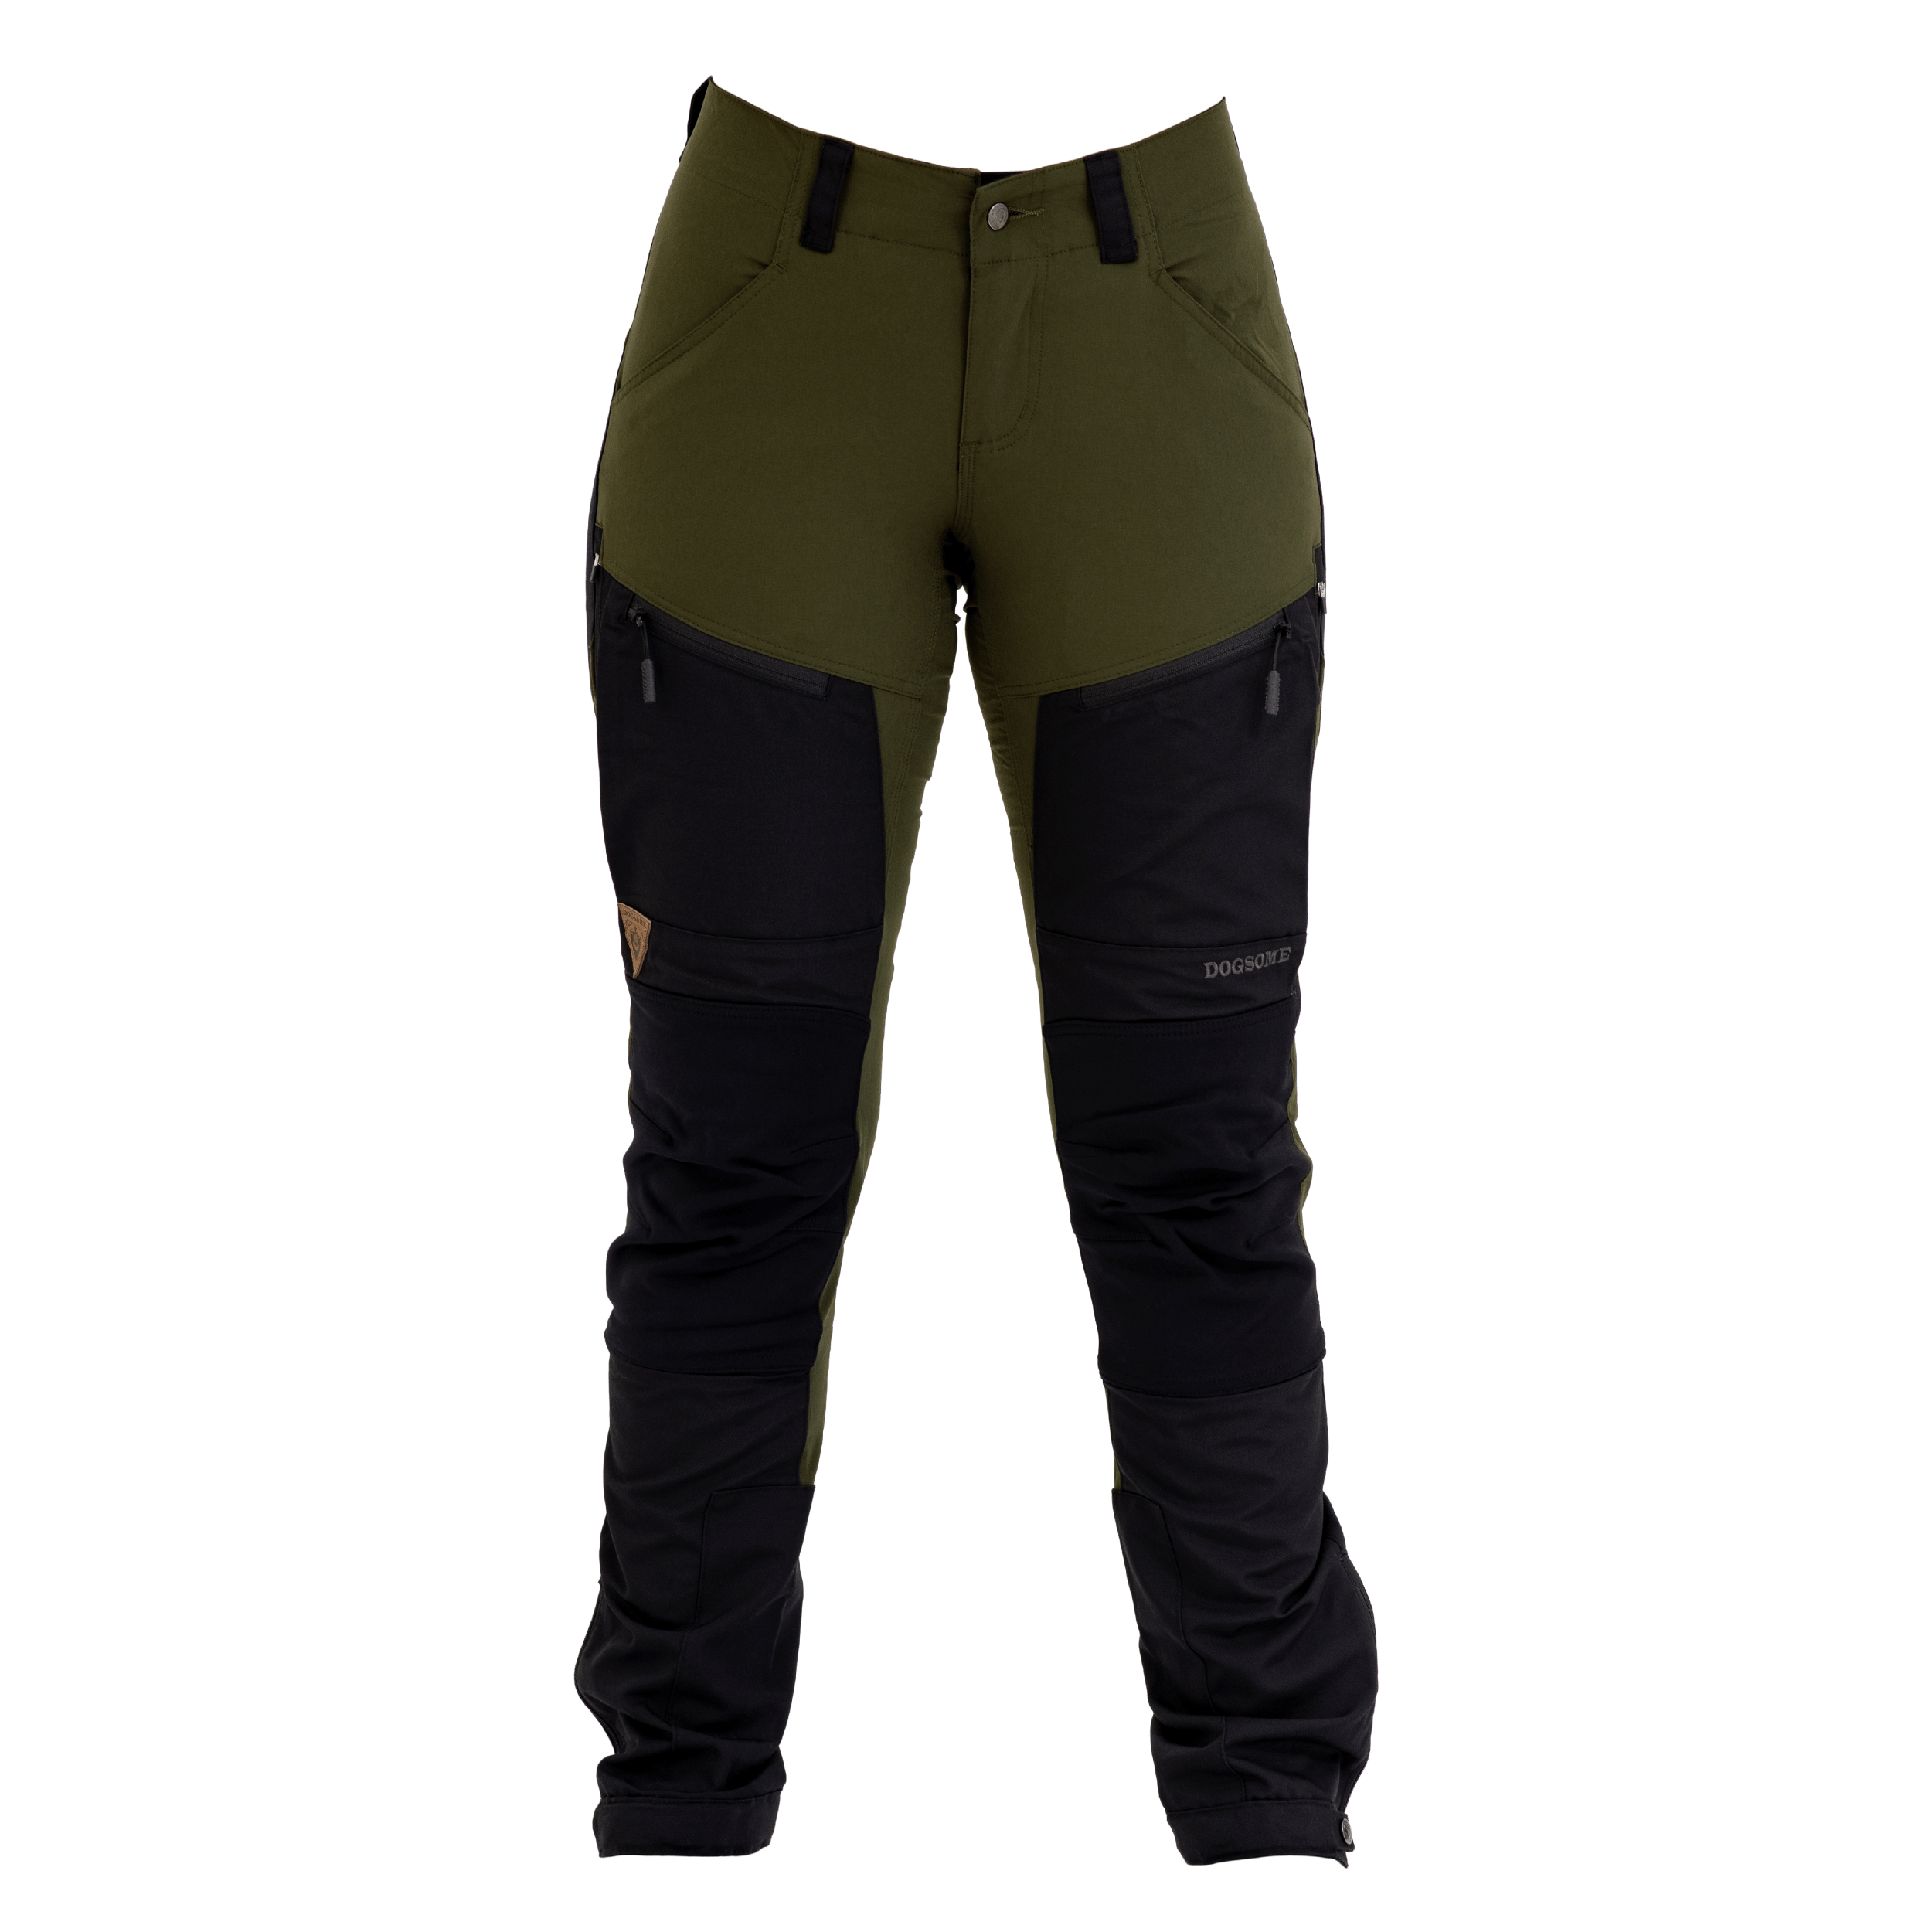 Dogsome All Year Off-Road Performance Turbukse Dame - XXL-44 - Oliven